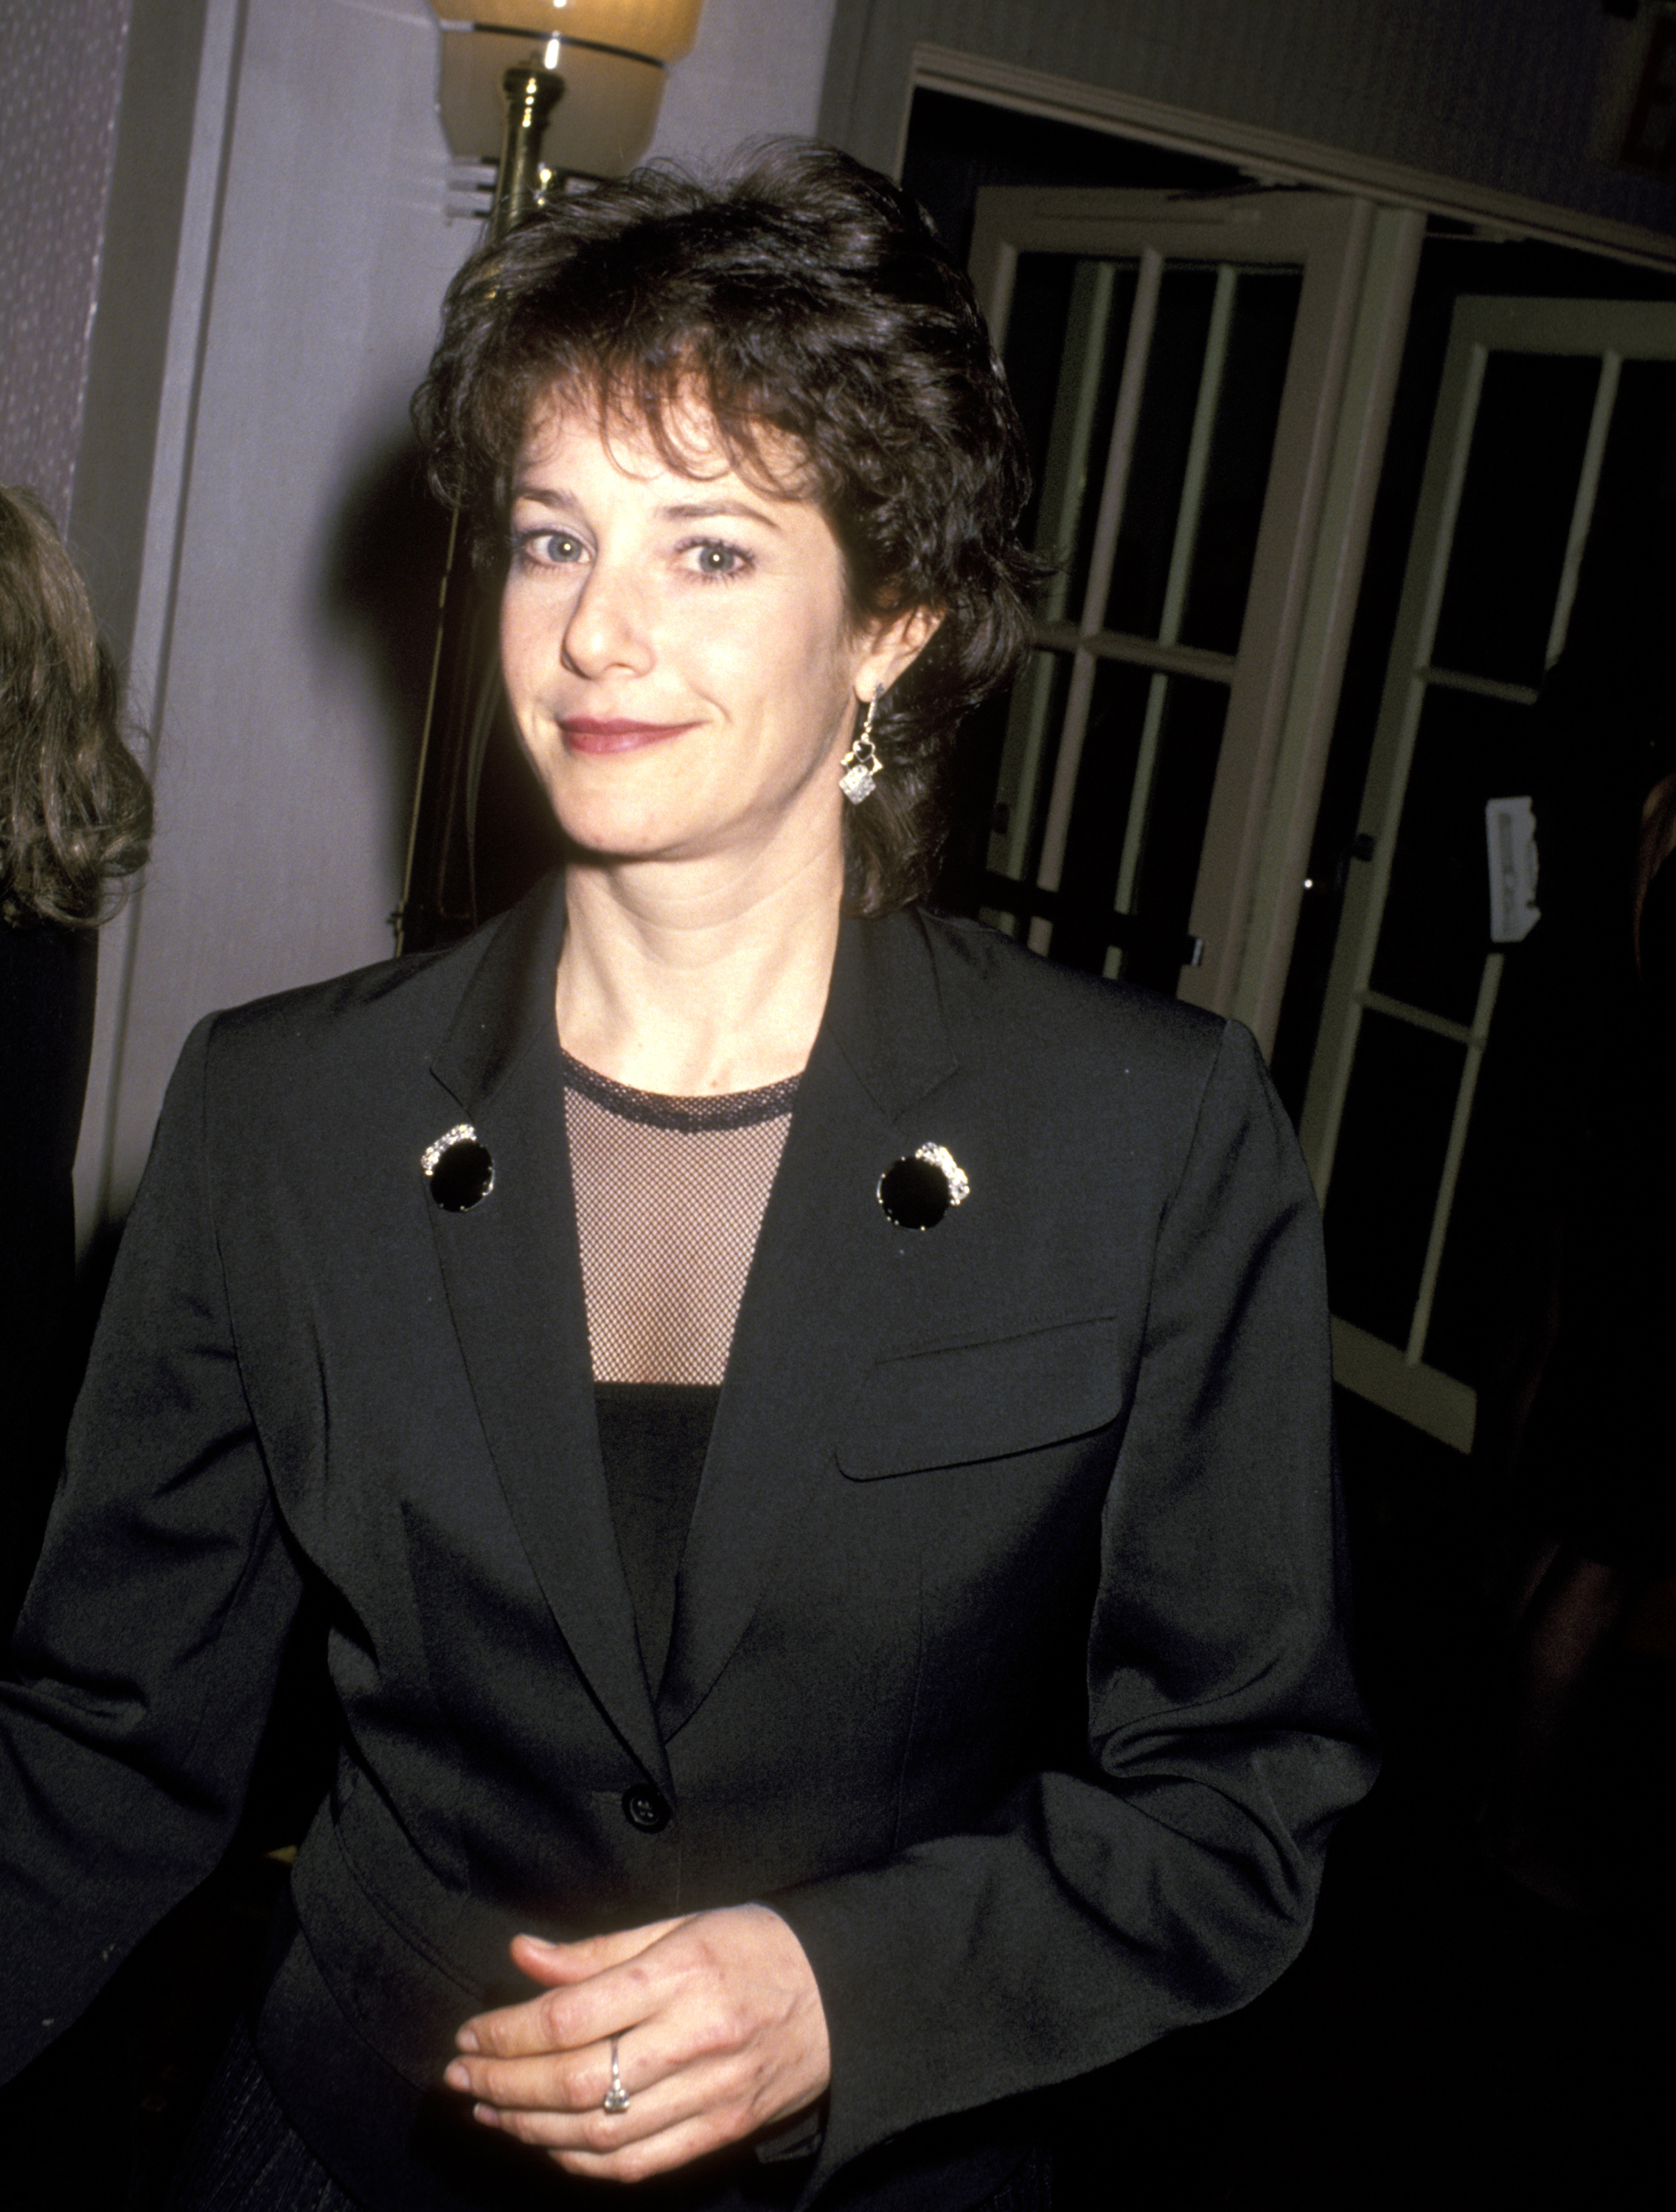 Debra Winger during American Museum of the Moving Image Tribute to Al Pacino at Waldorf Astoria Hotel on February 20, 1993 in New York City. | Source: Getty Images